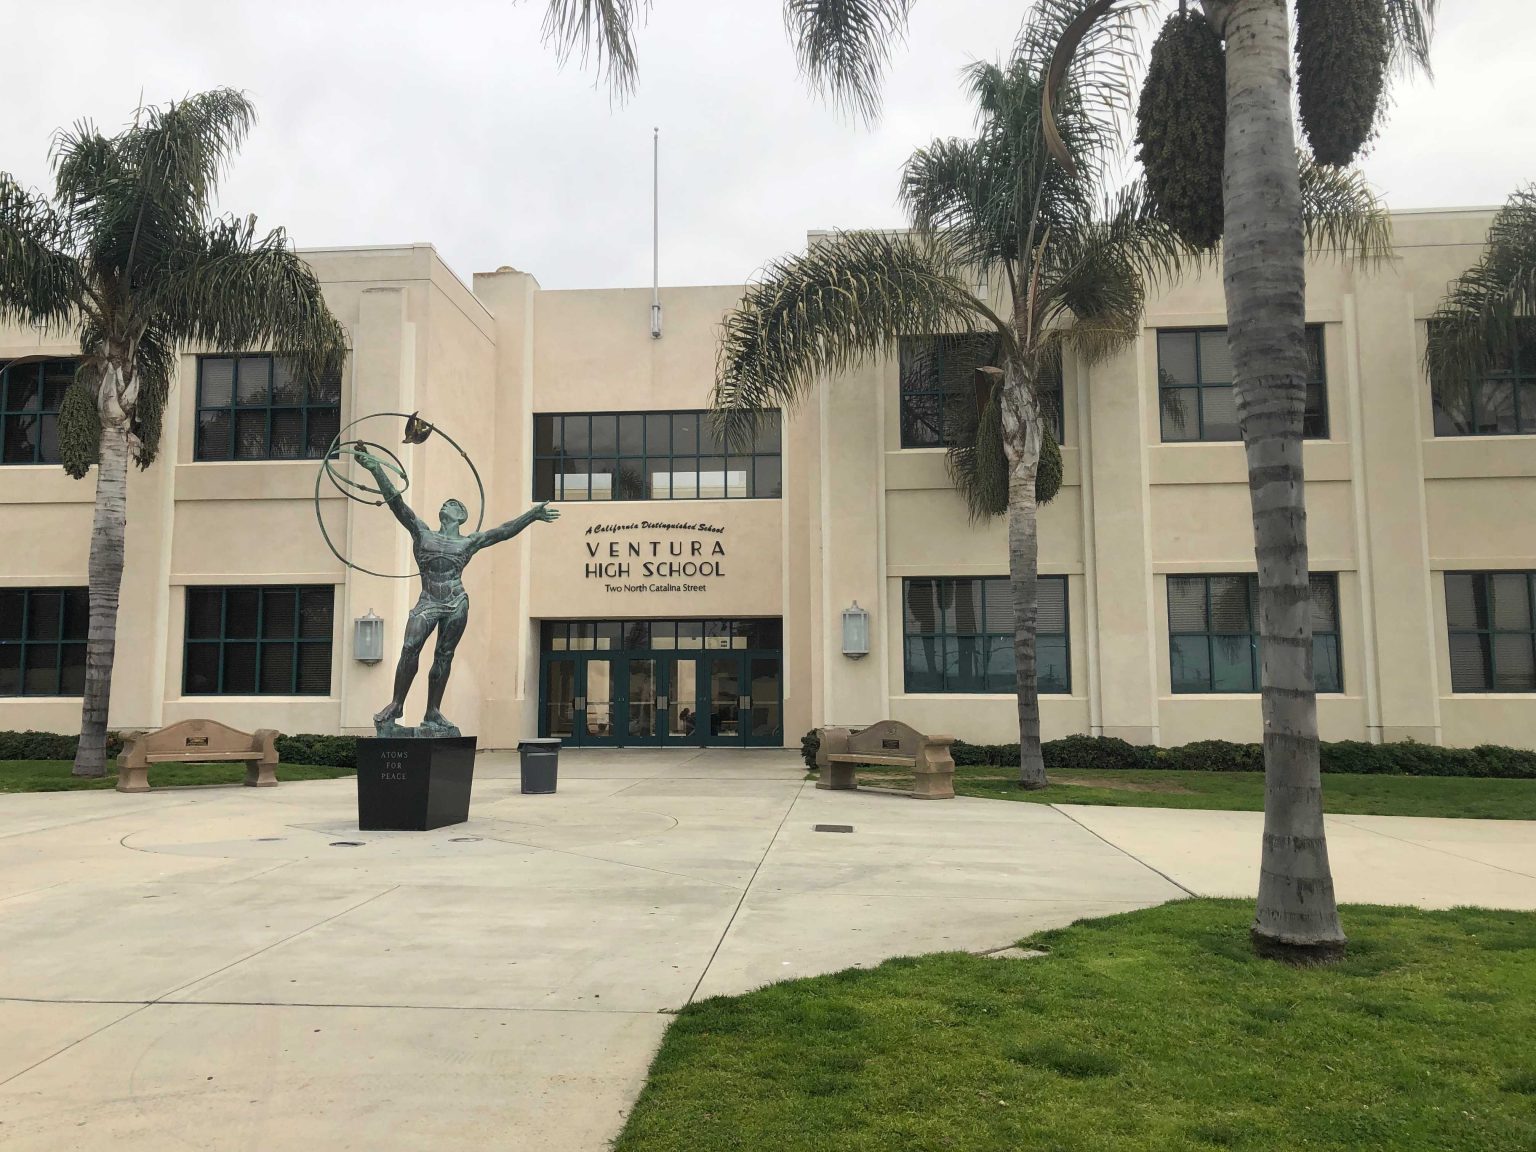 Ventura High has a rich history how much do you think you know? The